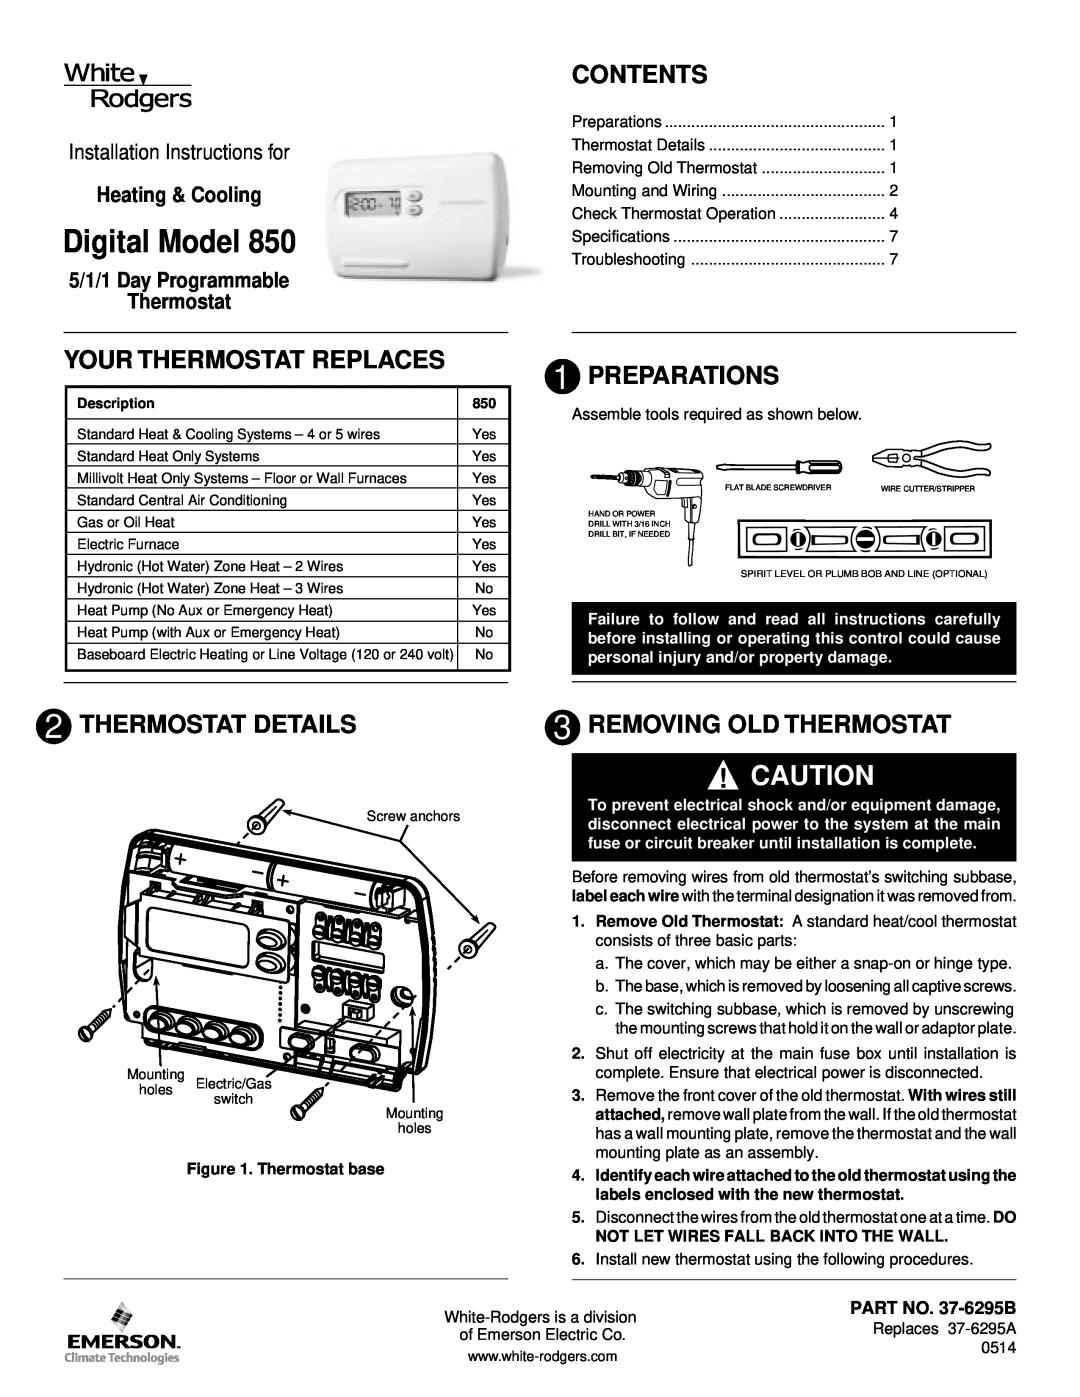 Emerson 850 installation instructions Contents, Your Thermostat Replaces, Preparations, Thermostat Details, Digital Model 